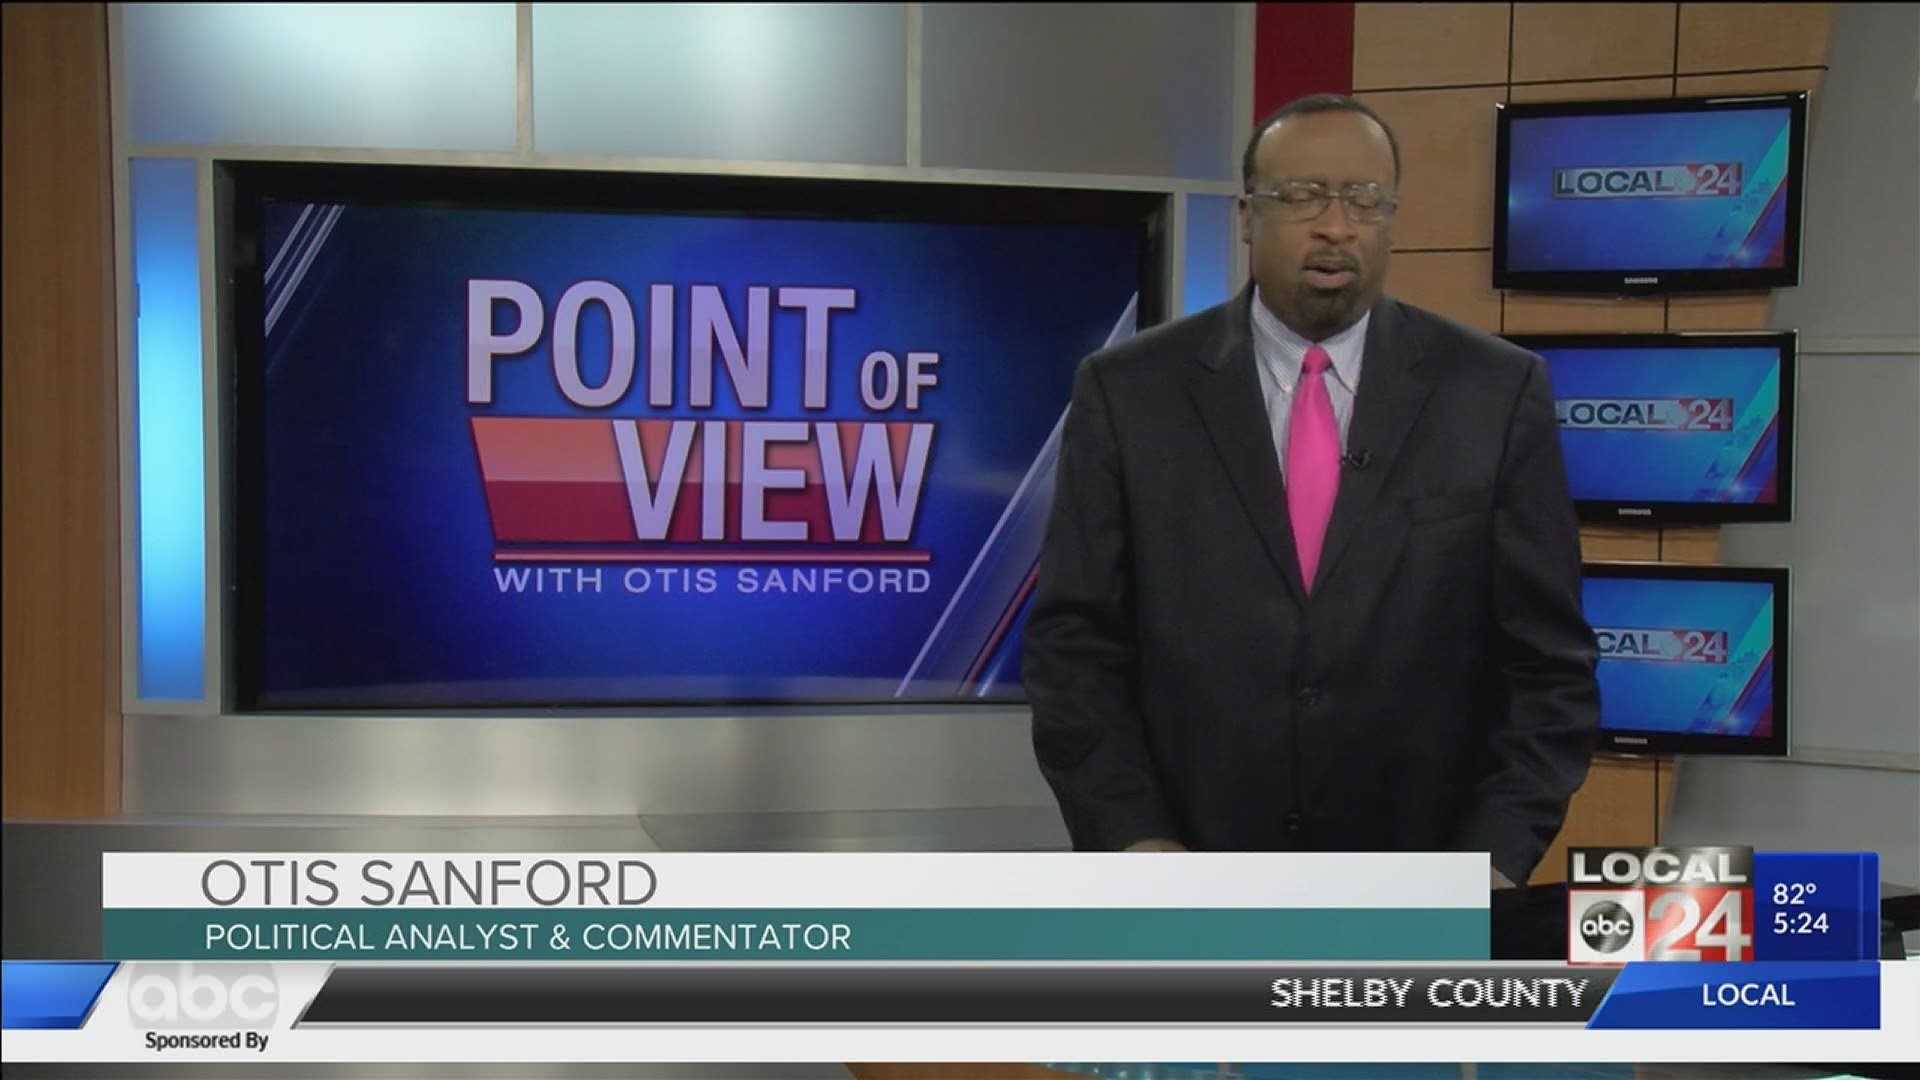 Local 24 News political analyst and commentator Otis Sanford shares his point of view on the upcoming August election.